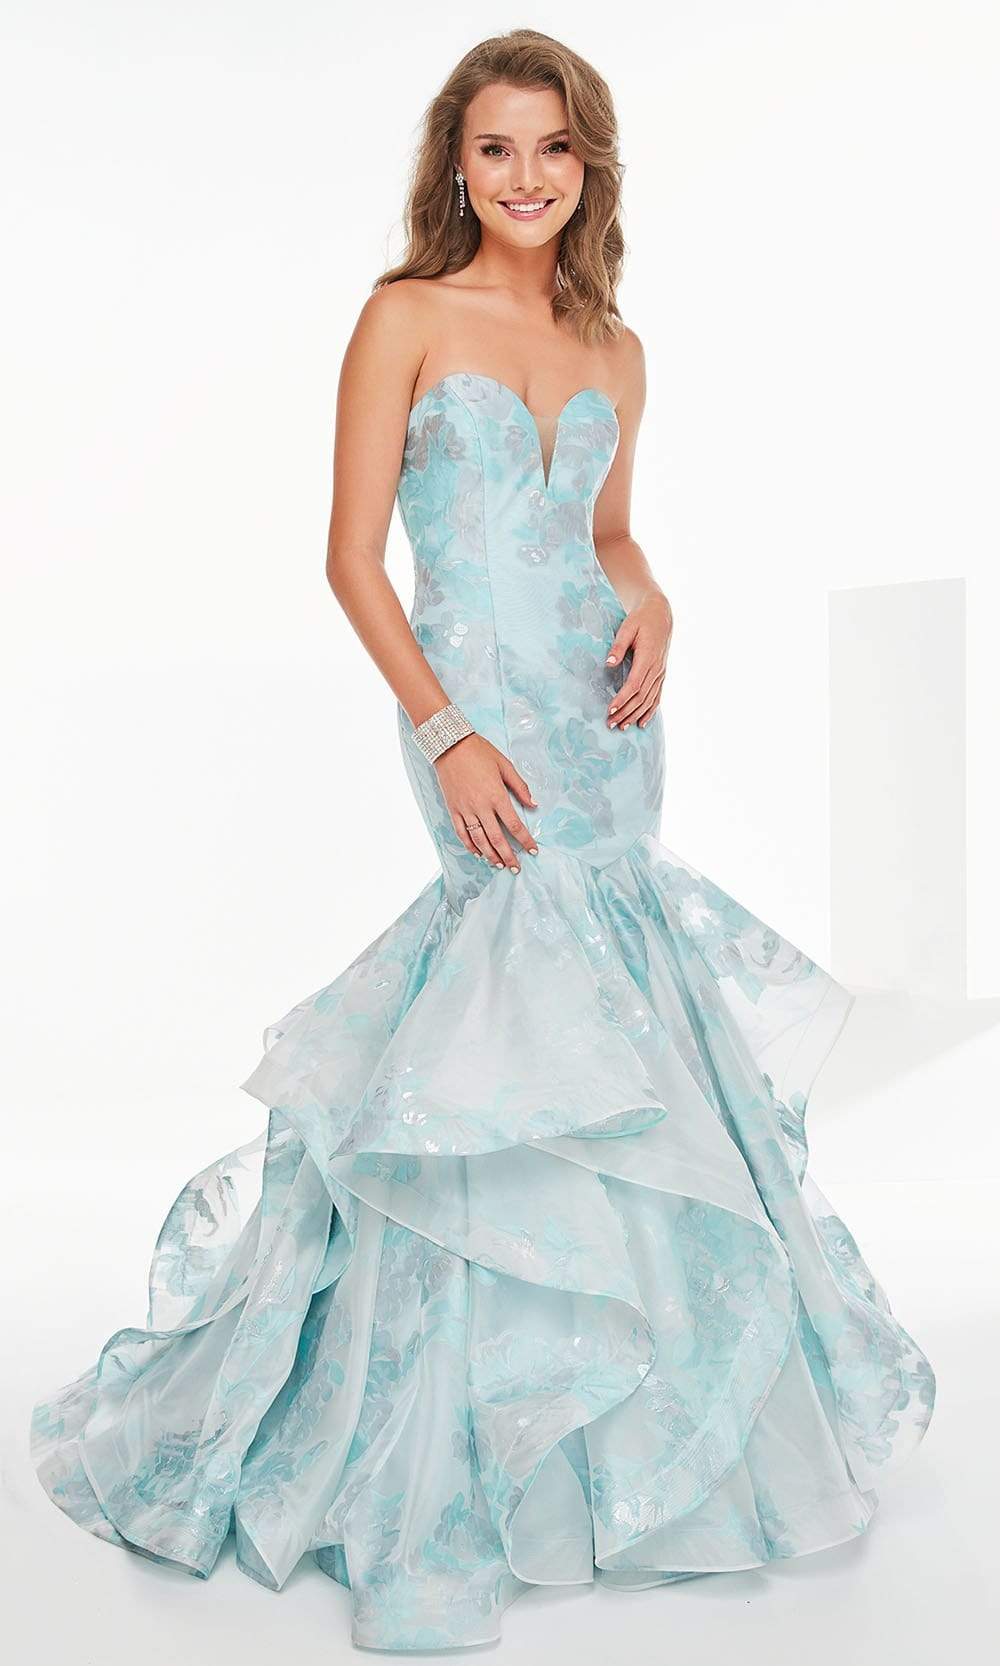 Tiffany Exclusive - 46250 Strapless Tiered Floral Mermaid Gown Prom Dresses 0 / Aqua Multi